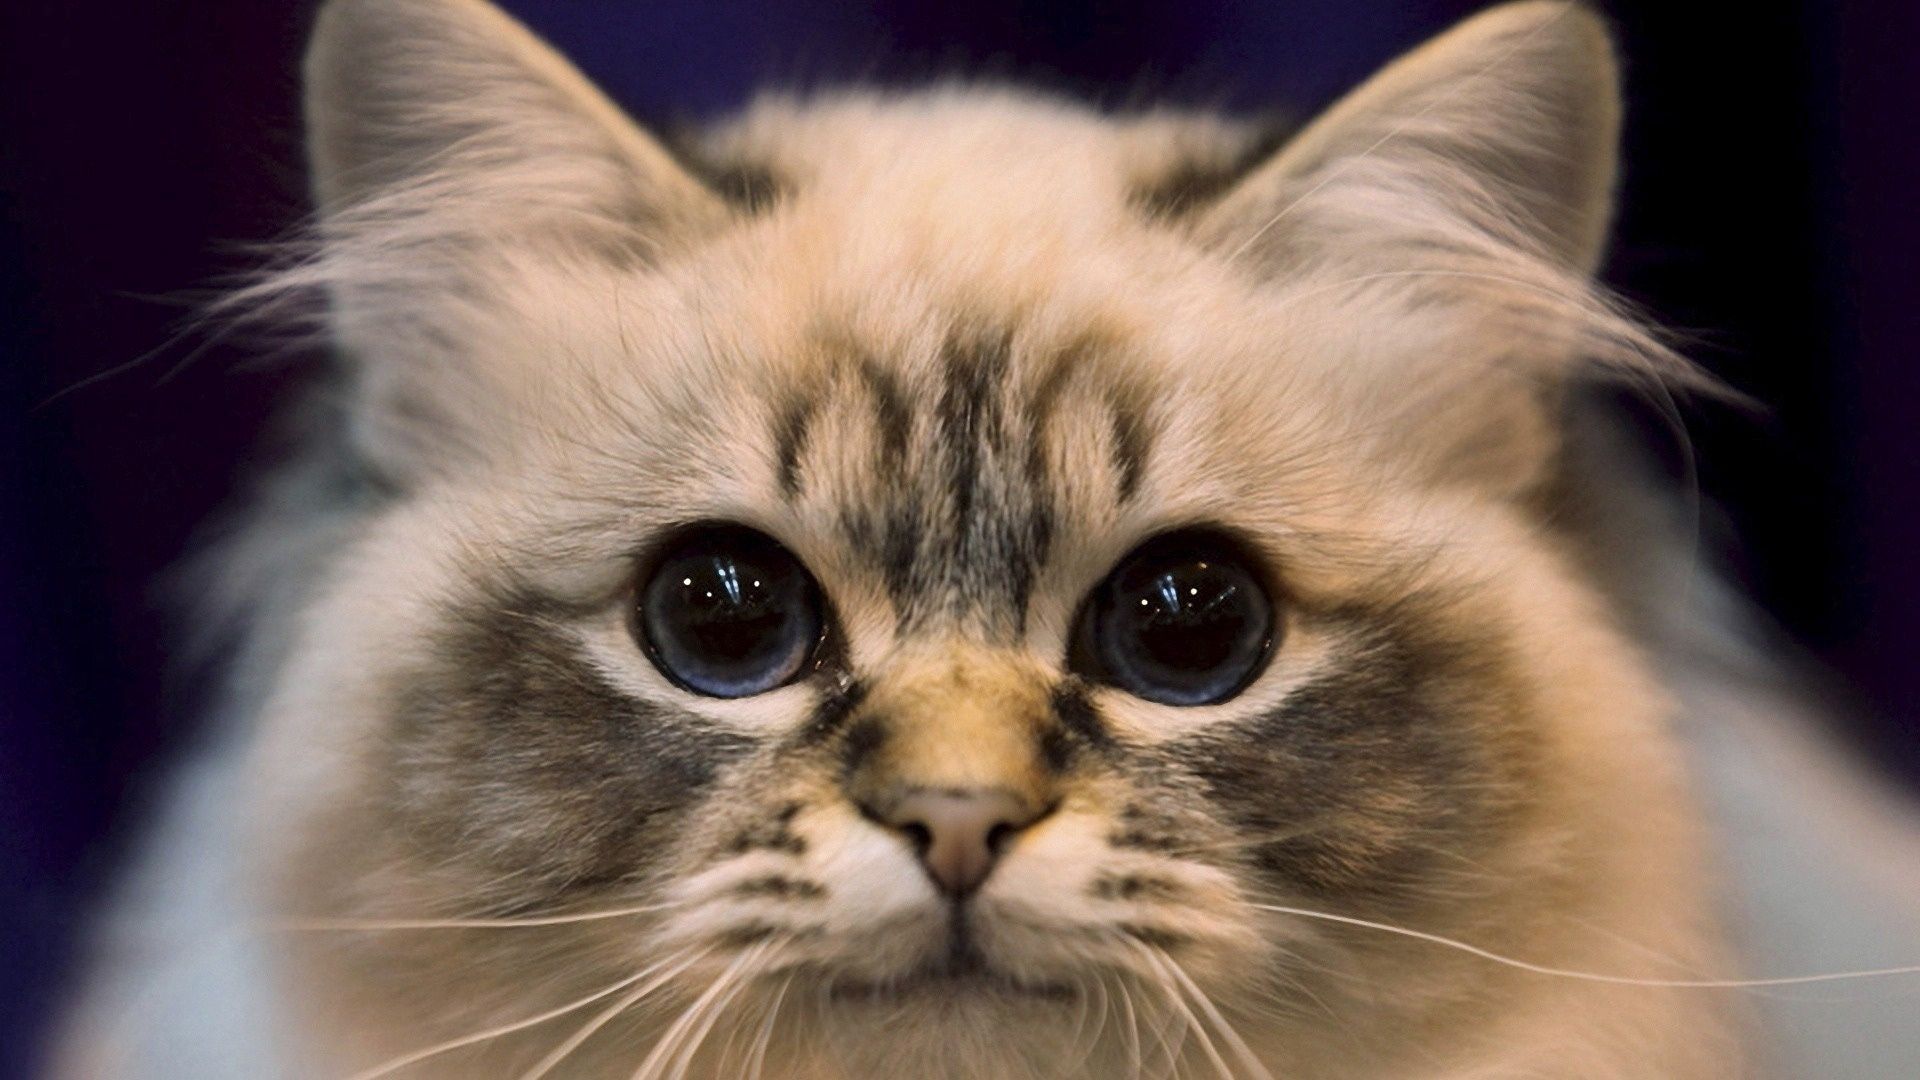 desktop Images animals, cat, fluffy, eyes, sight, opinion, nice, sweetheart